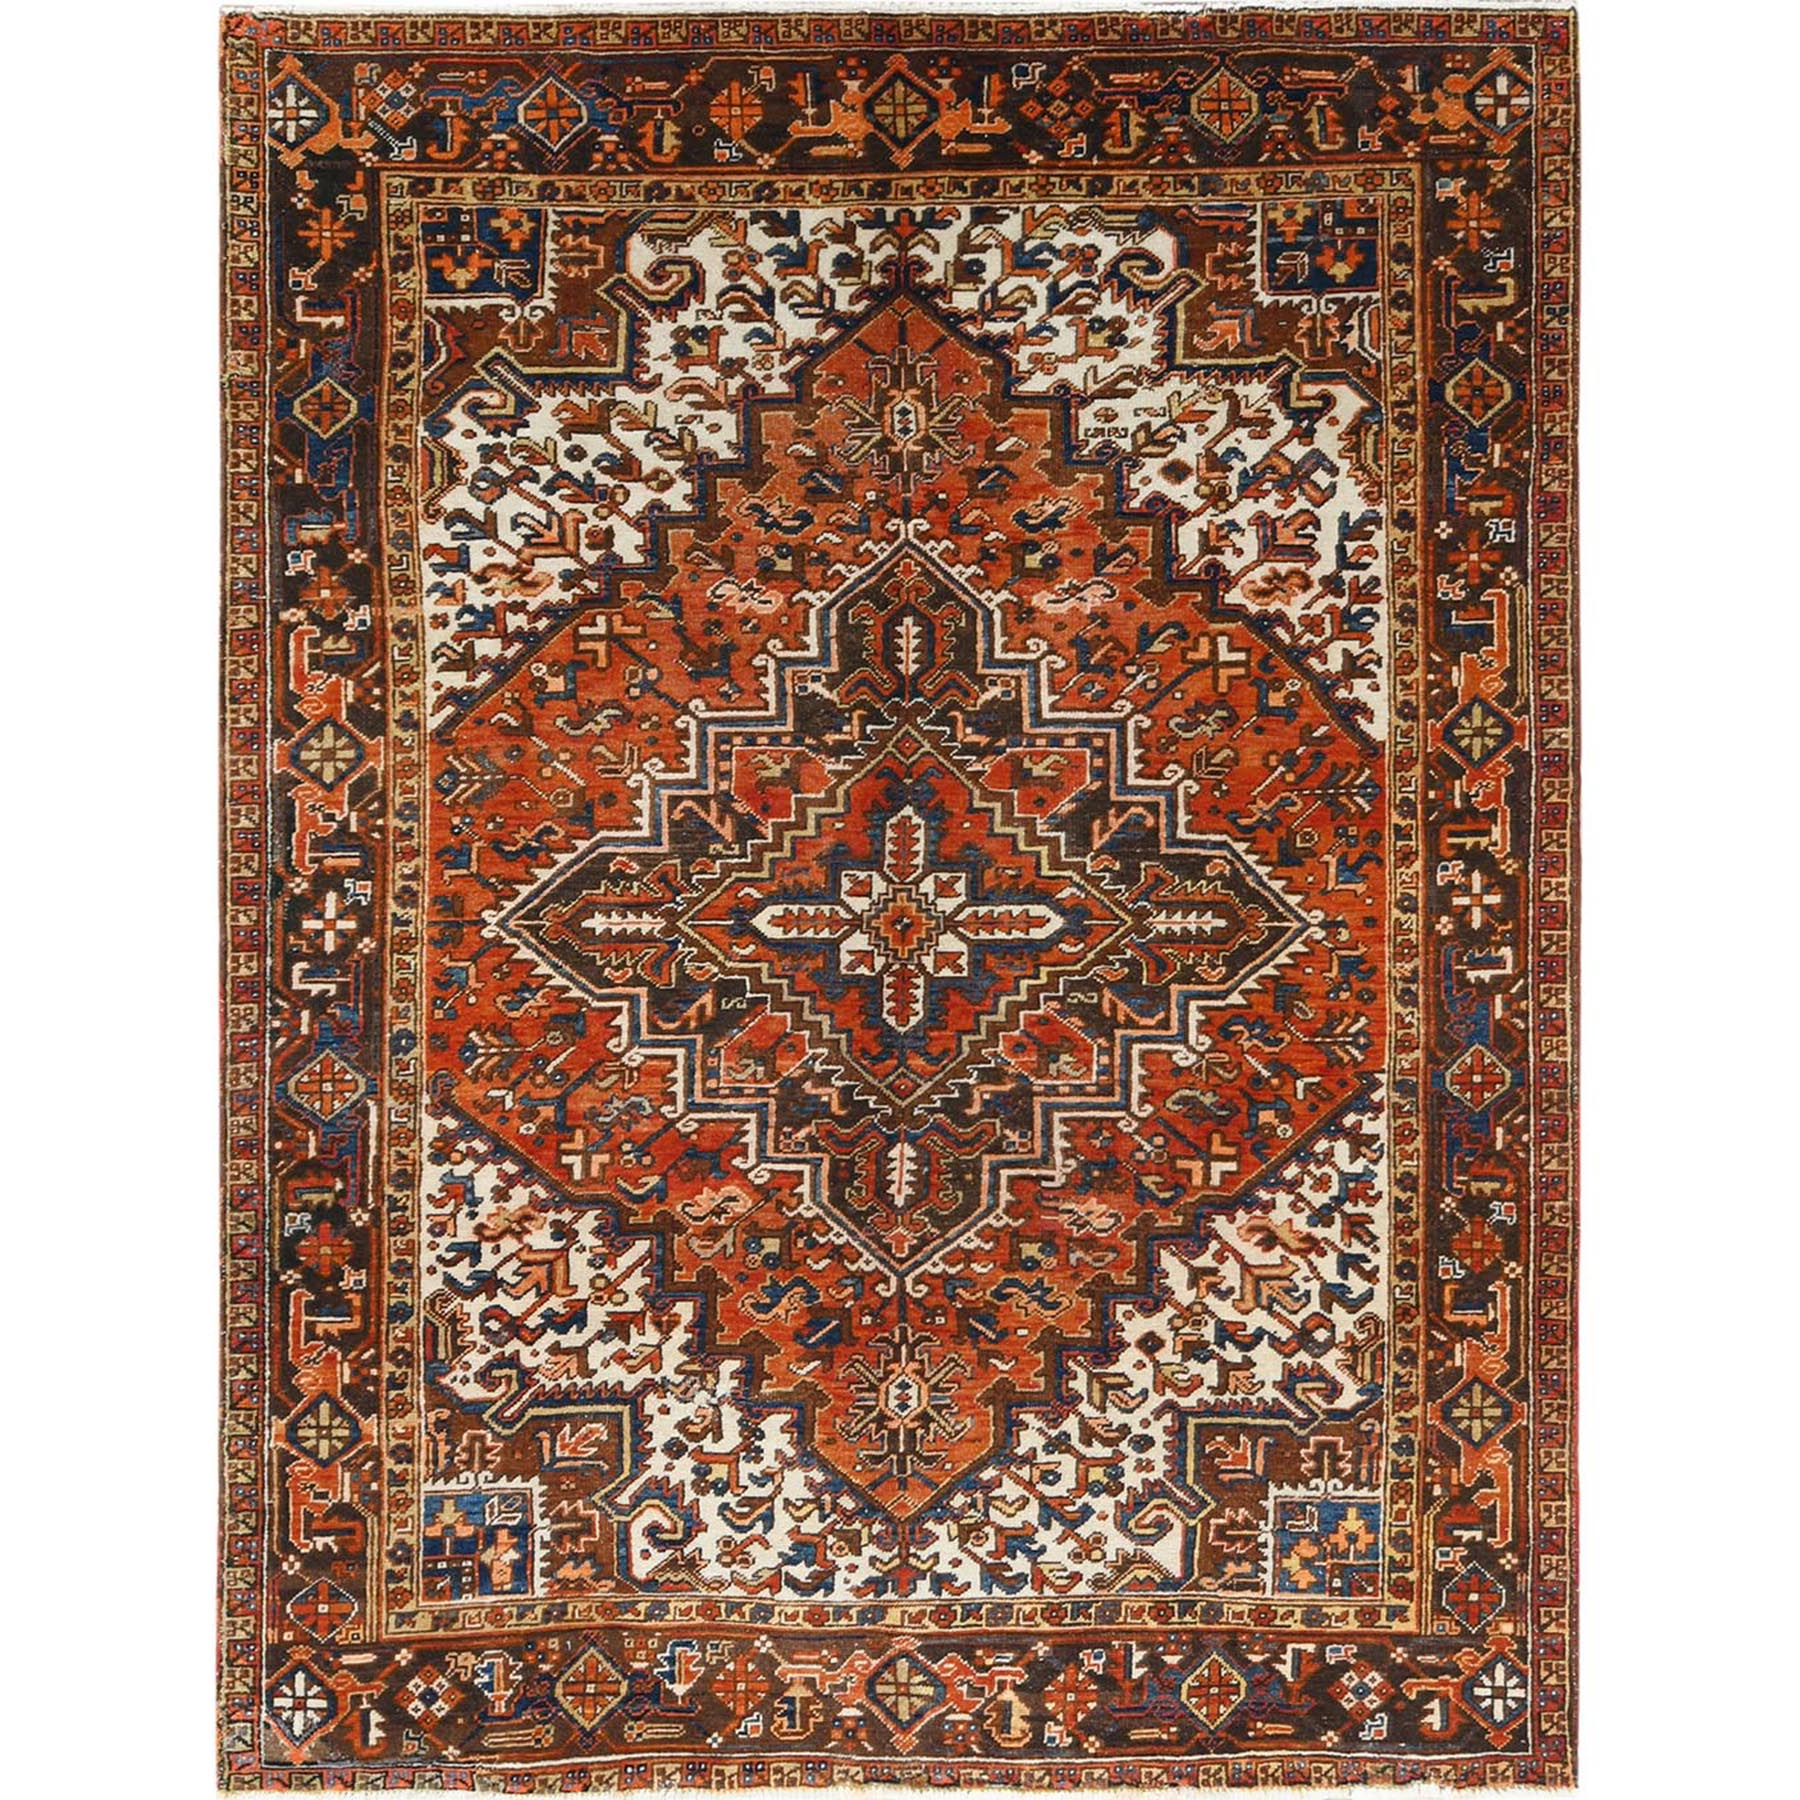  Wool Hand-Knotted Area Rug 7'3